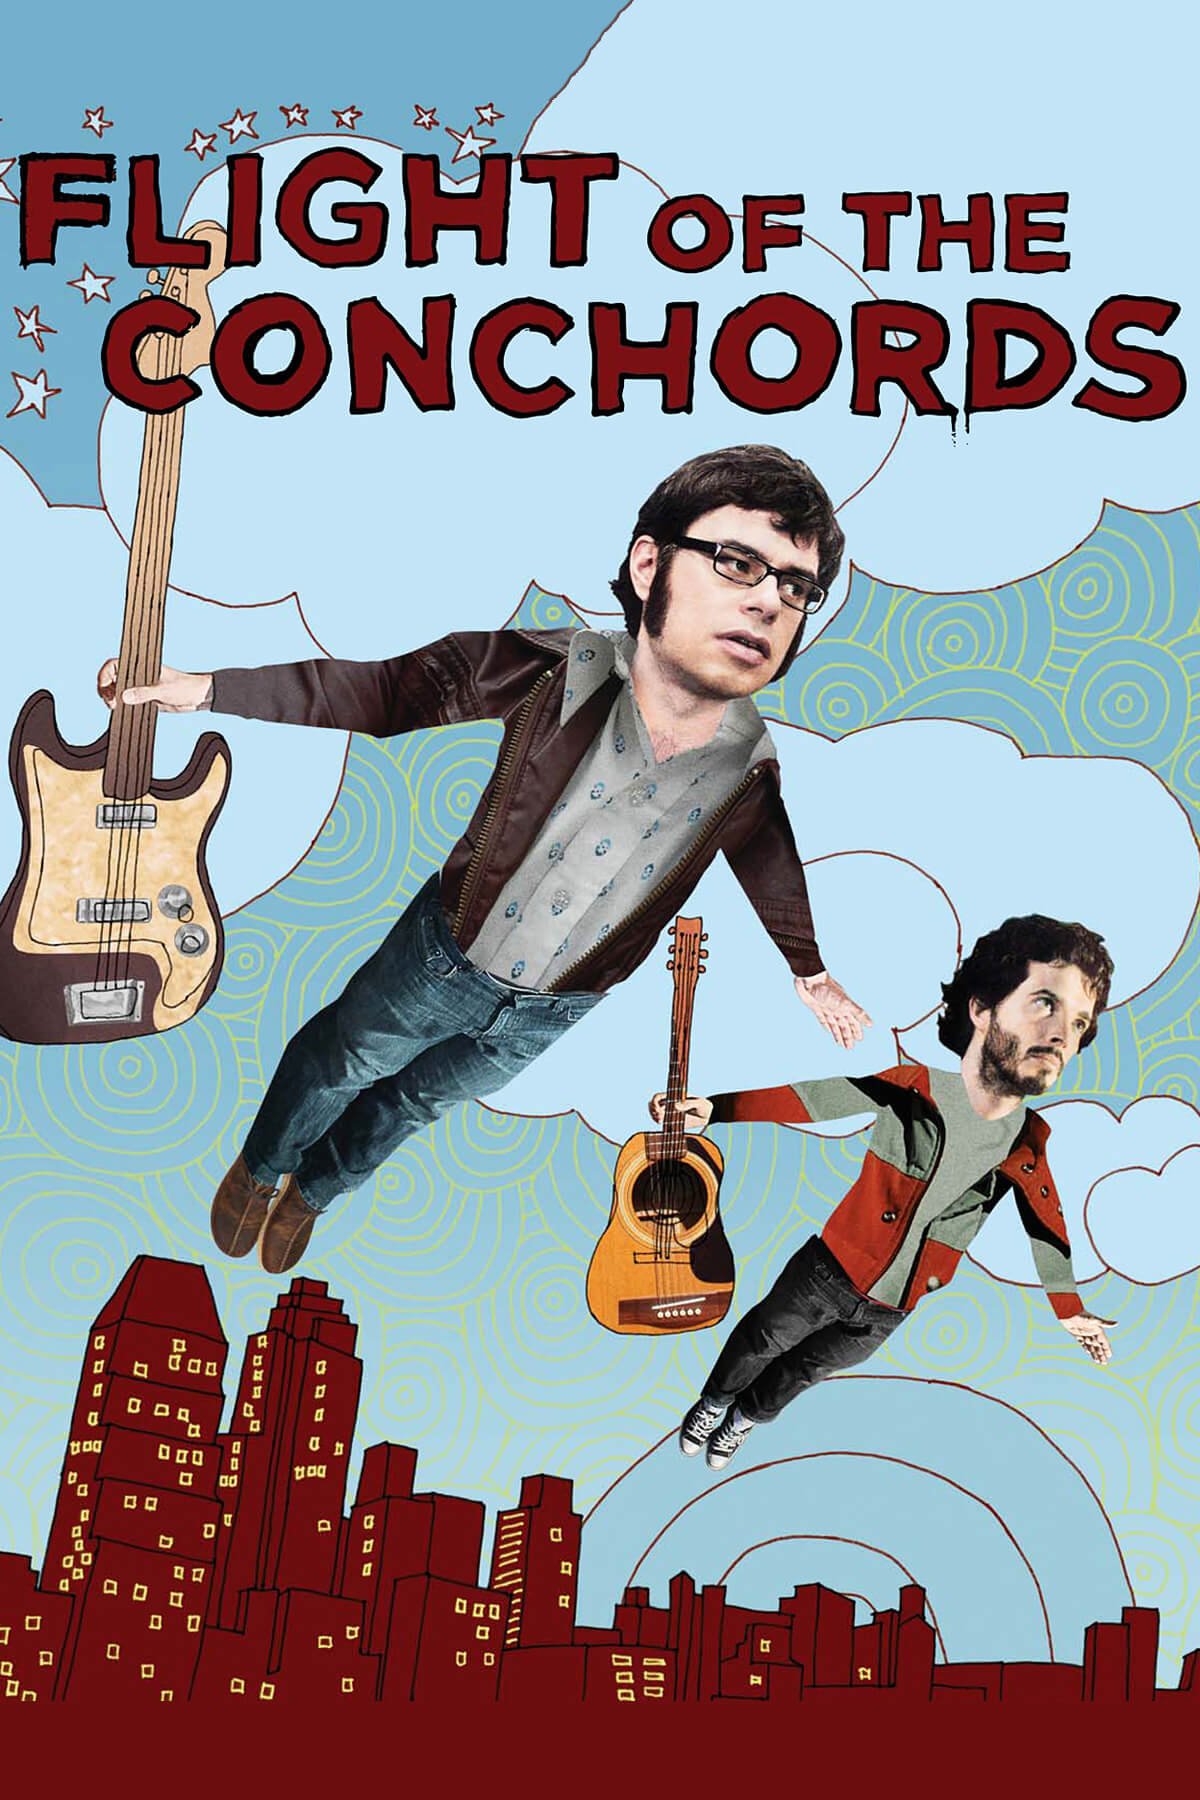 Flight of the Conchords (2007)&lt;strong&gt;#221&lt;/strong&gt;